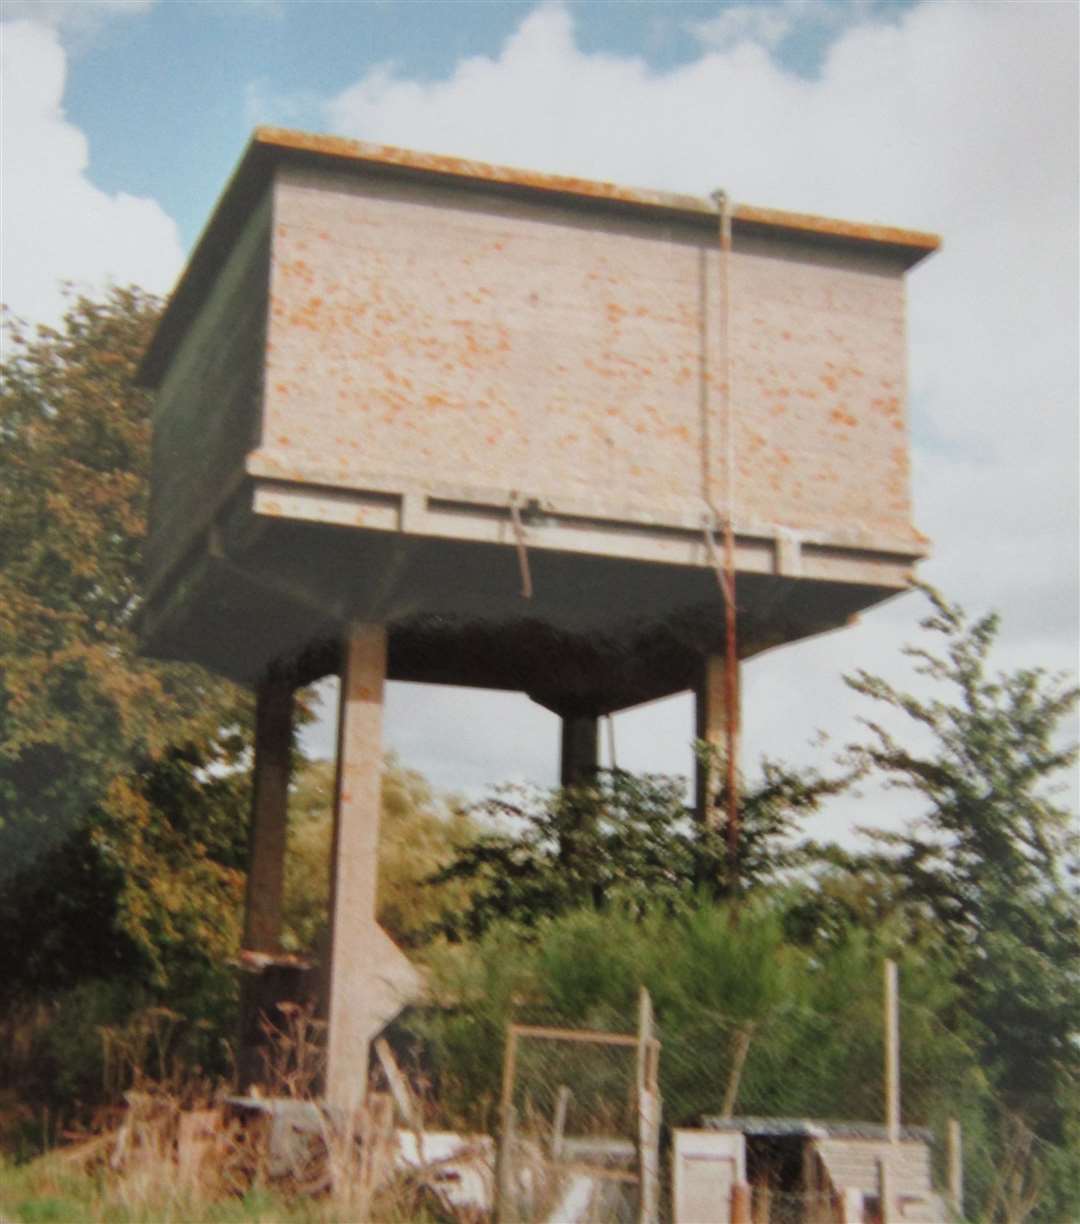 This concrete water tower was described by Kevin McCloud as "an ugly brute" before it was transformed in to a modern and sleek home